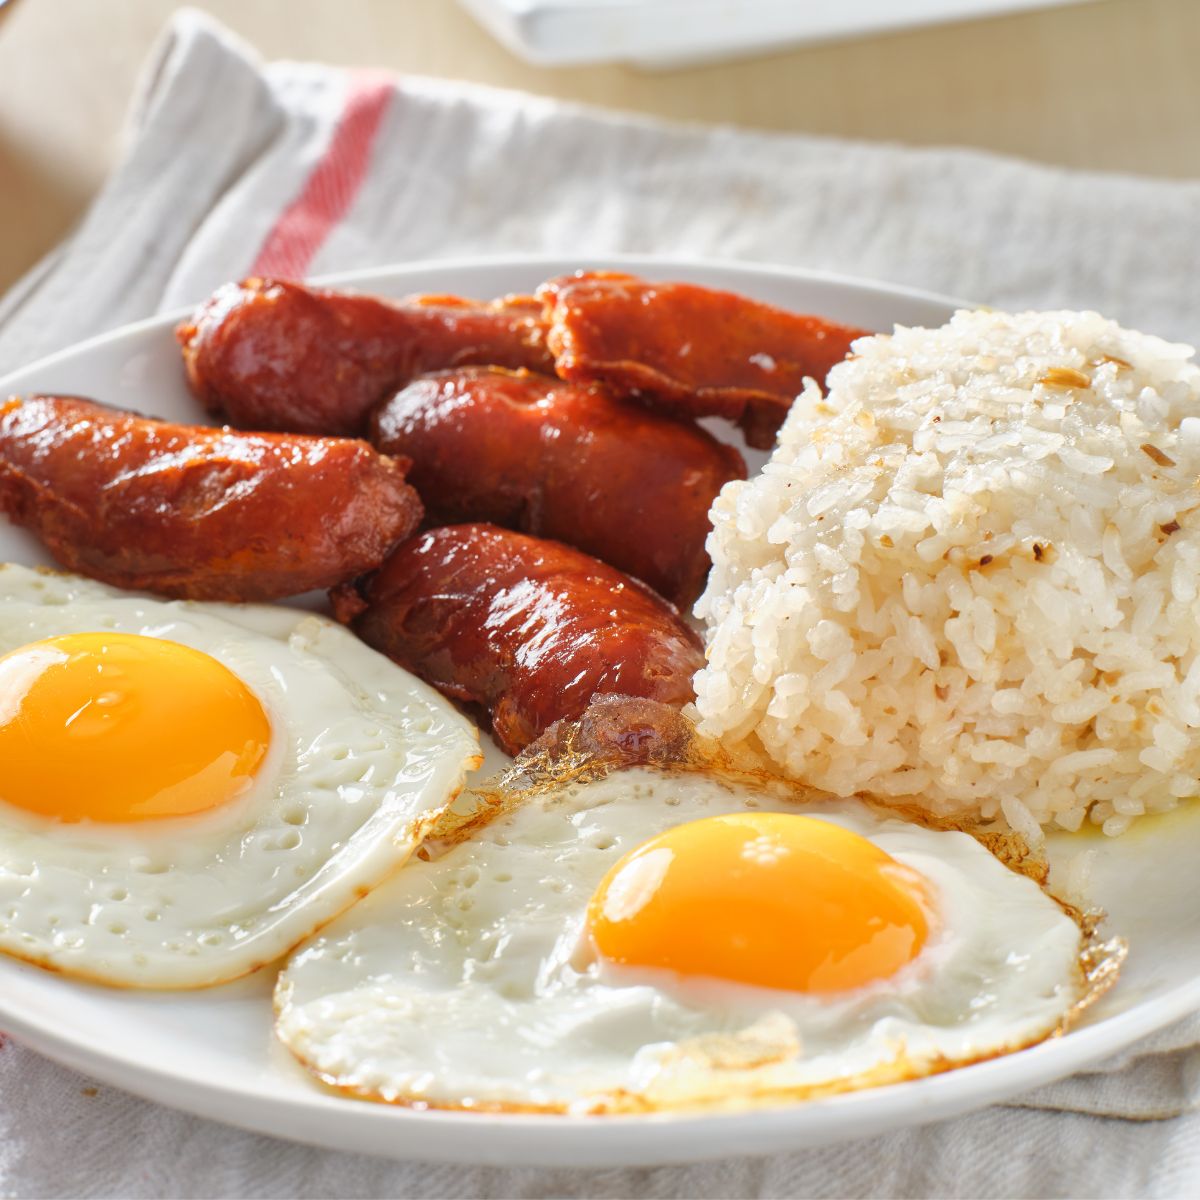 Breakfast rice with eggs and sausage.